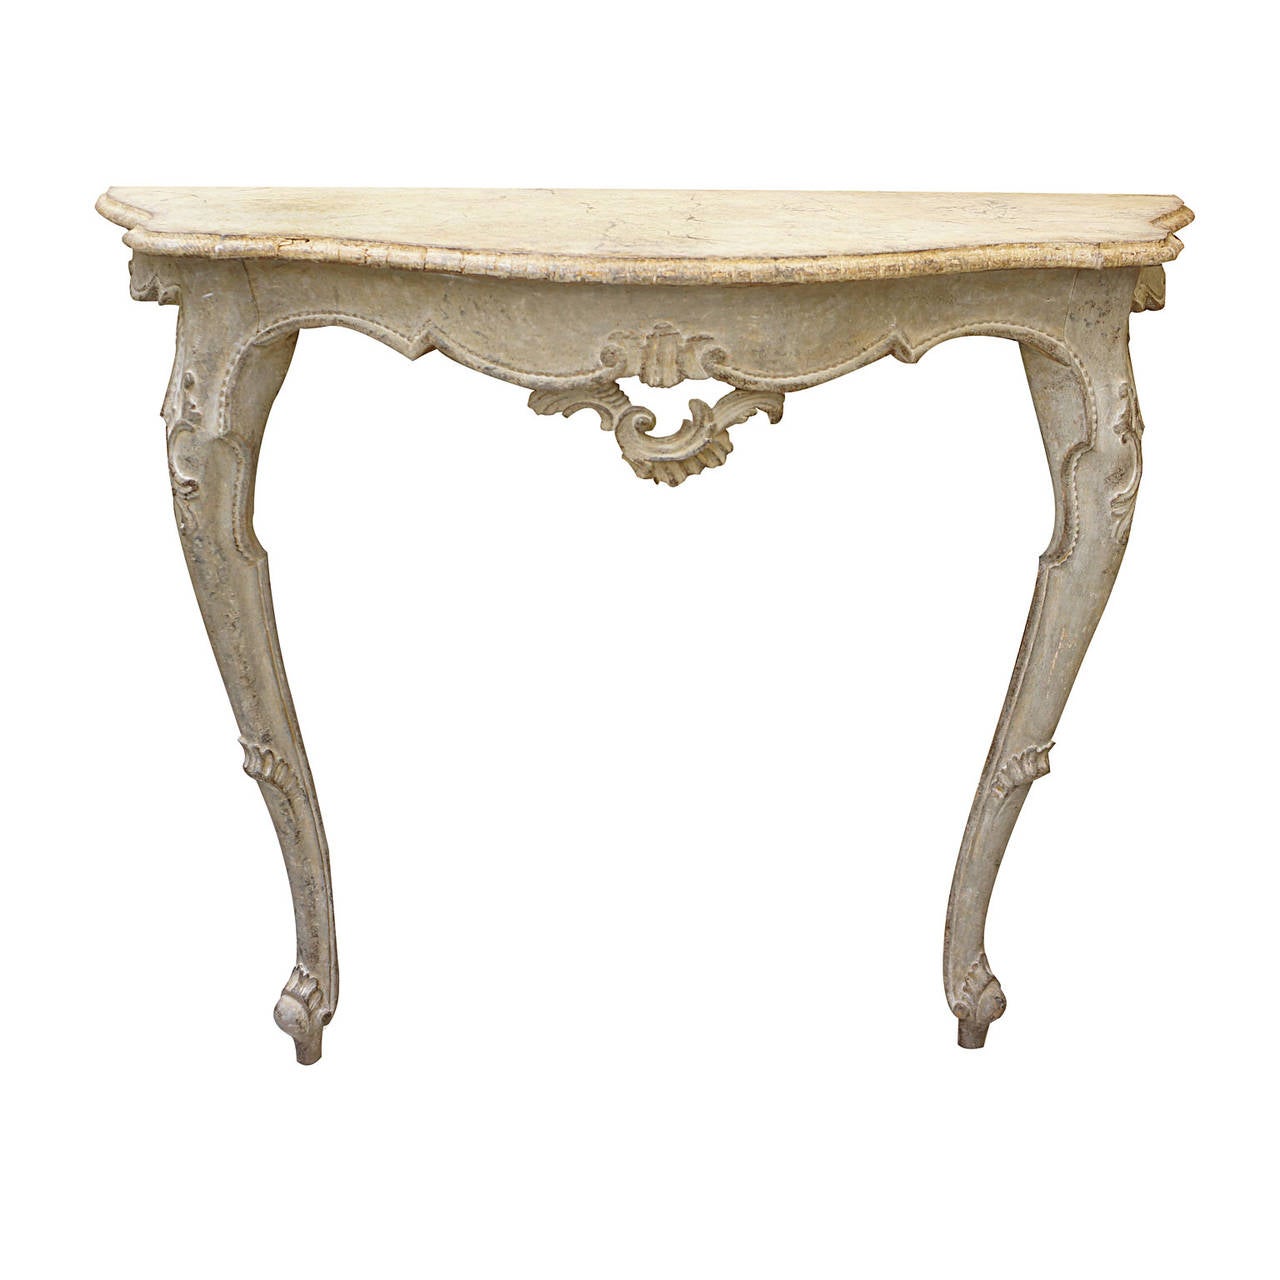 Pair of 18th Century Gustavian, hand-painted, demilune console tables with beautifully carved frames and detailed carved cabriole legs.